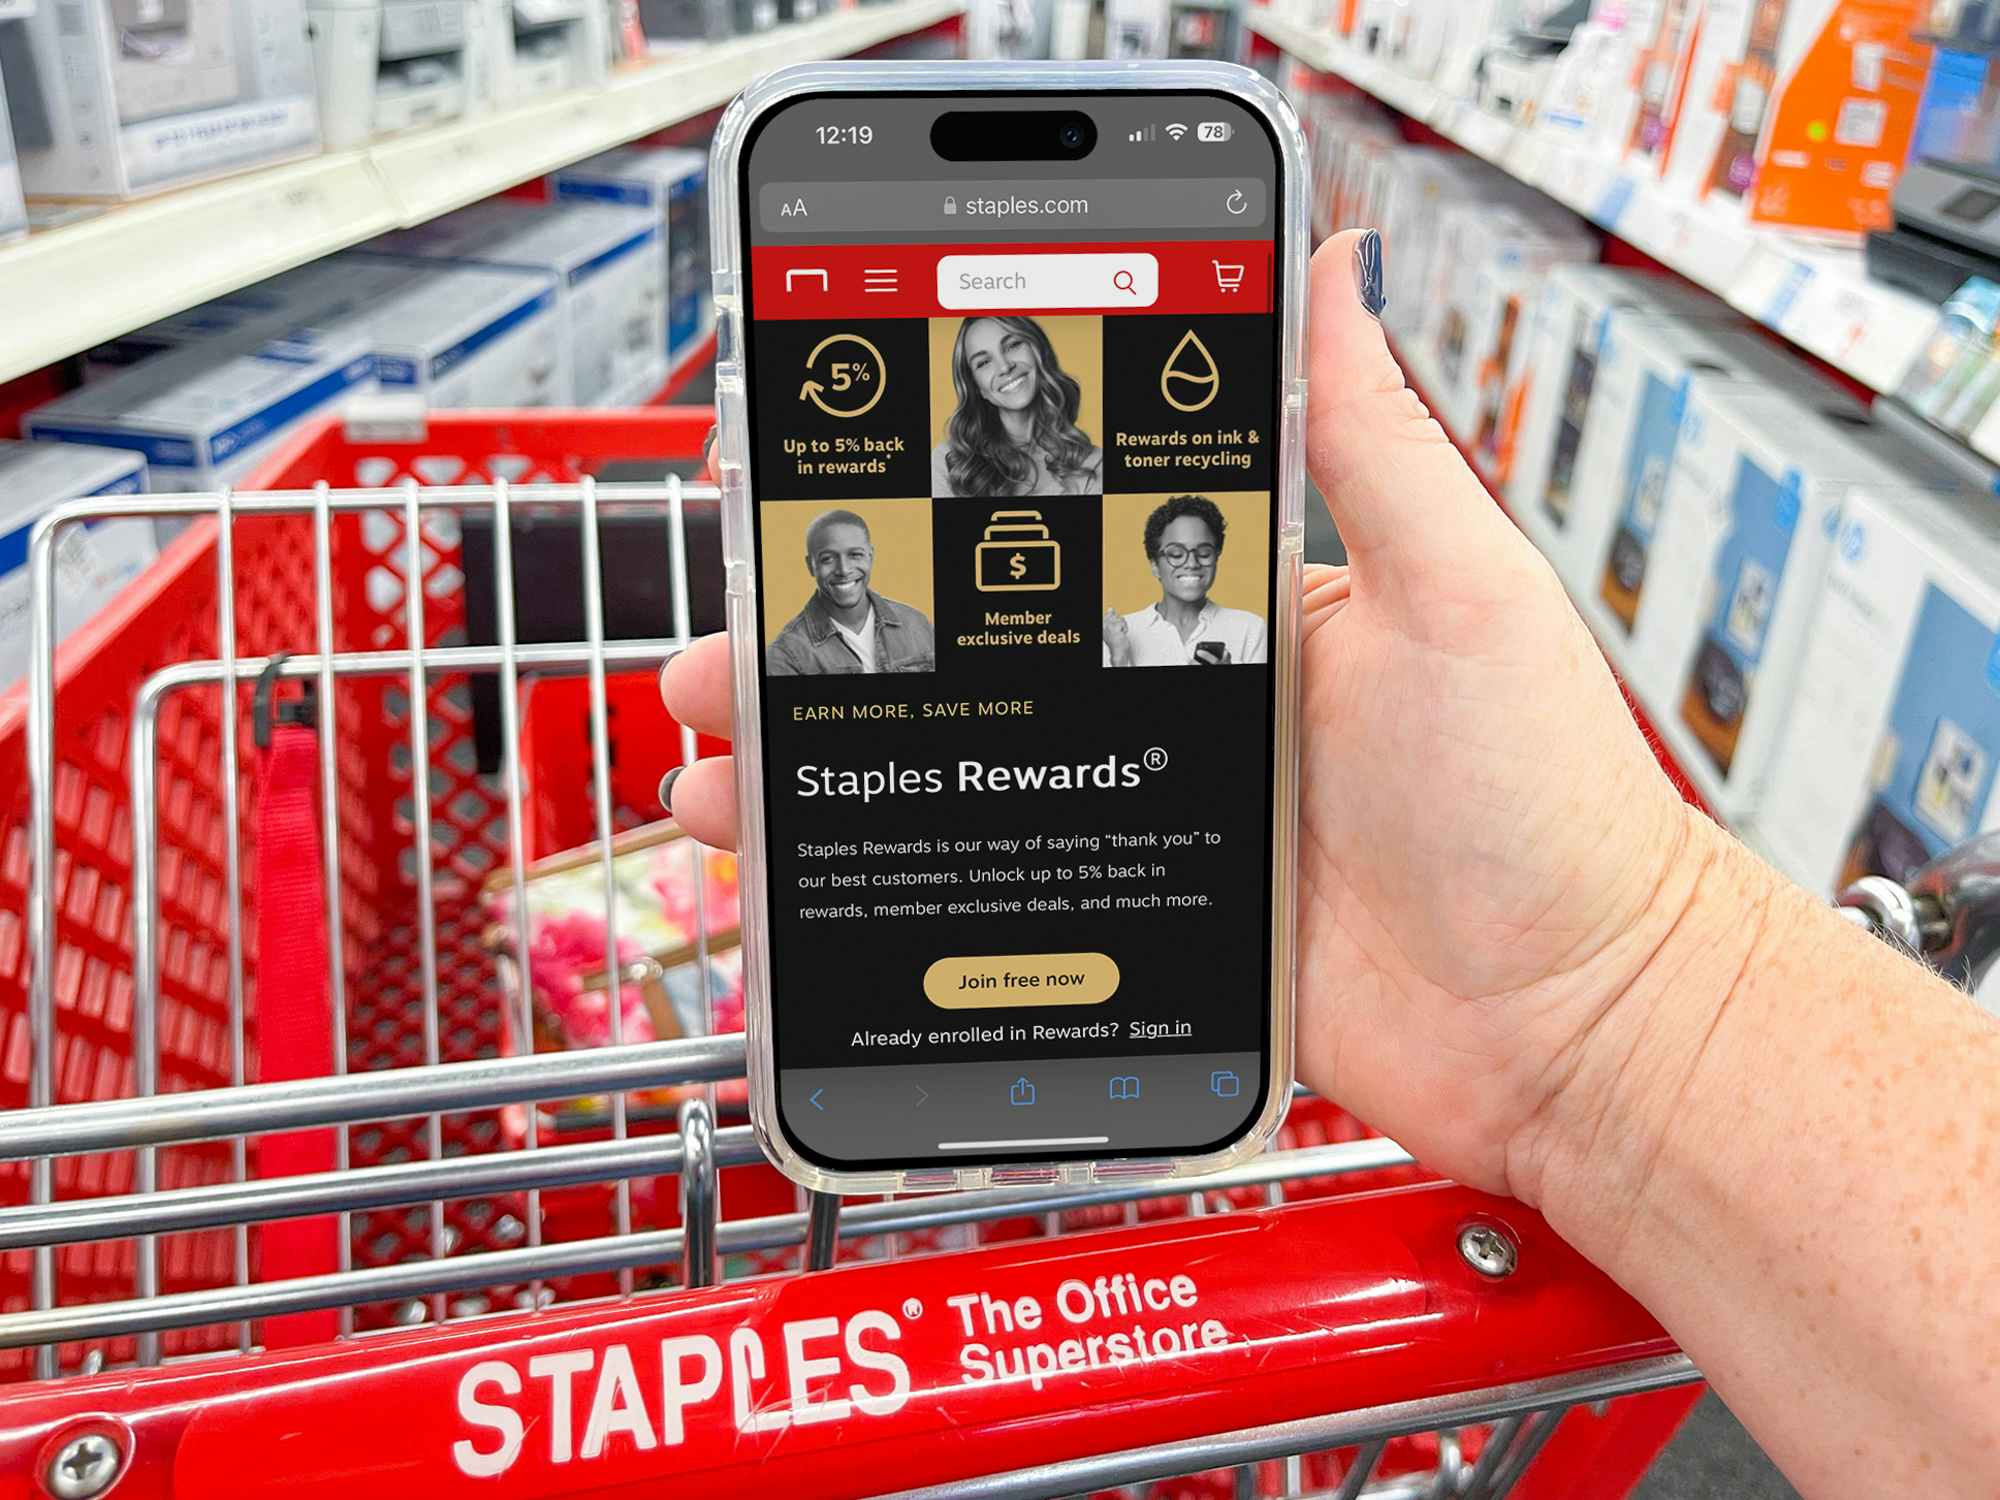 10 Tips to Save on Back to School at Staples - Coupons, Rewards